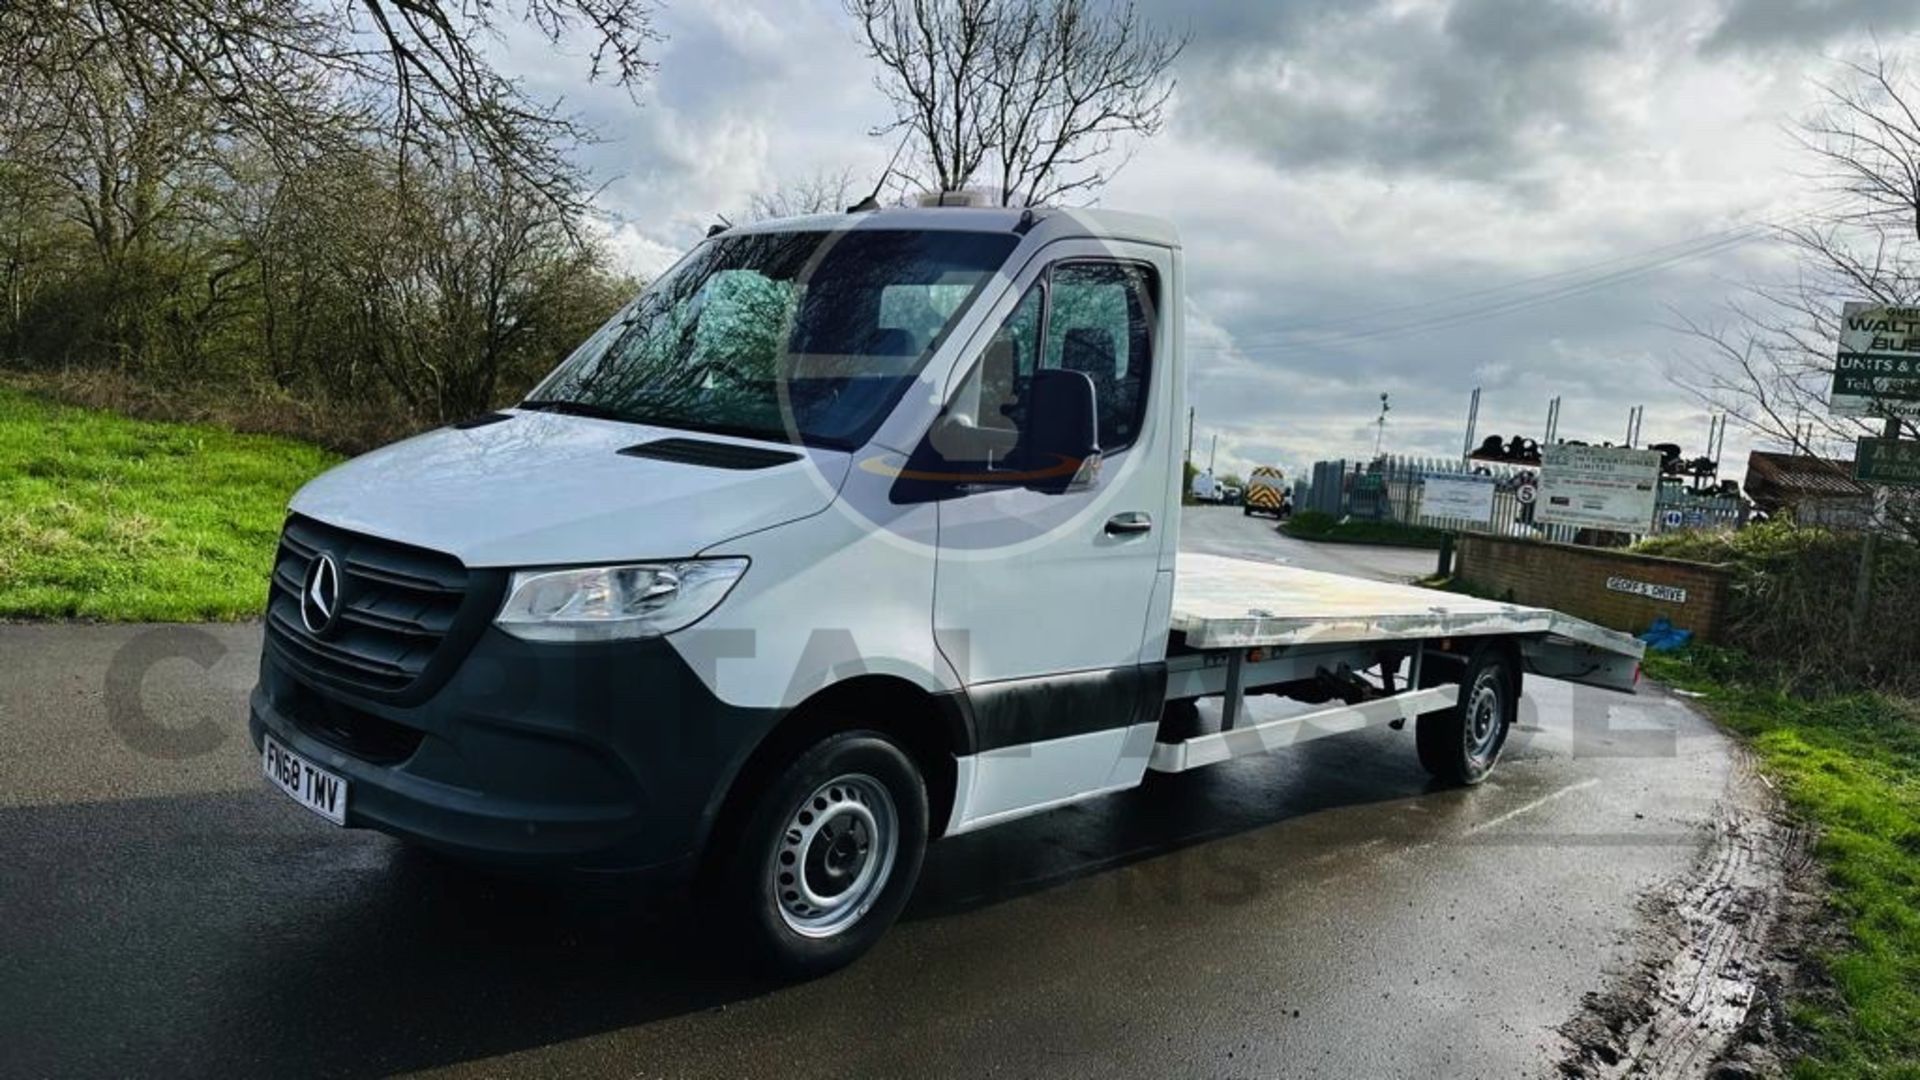 MERCEDES SPRINTER 314CDI "LWB RECOVERY TRUCK" 2019 MODEL - 1 OWNER - NEW BODY FITTED WITH ELEC WINCH - Image 8 of 37